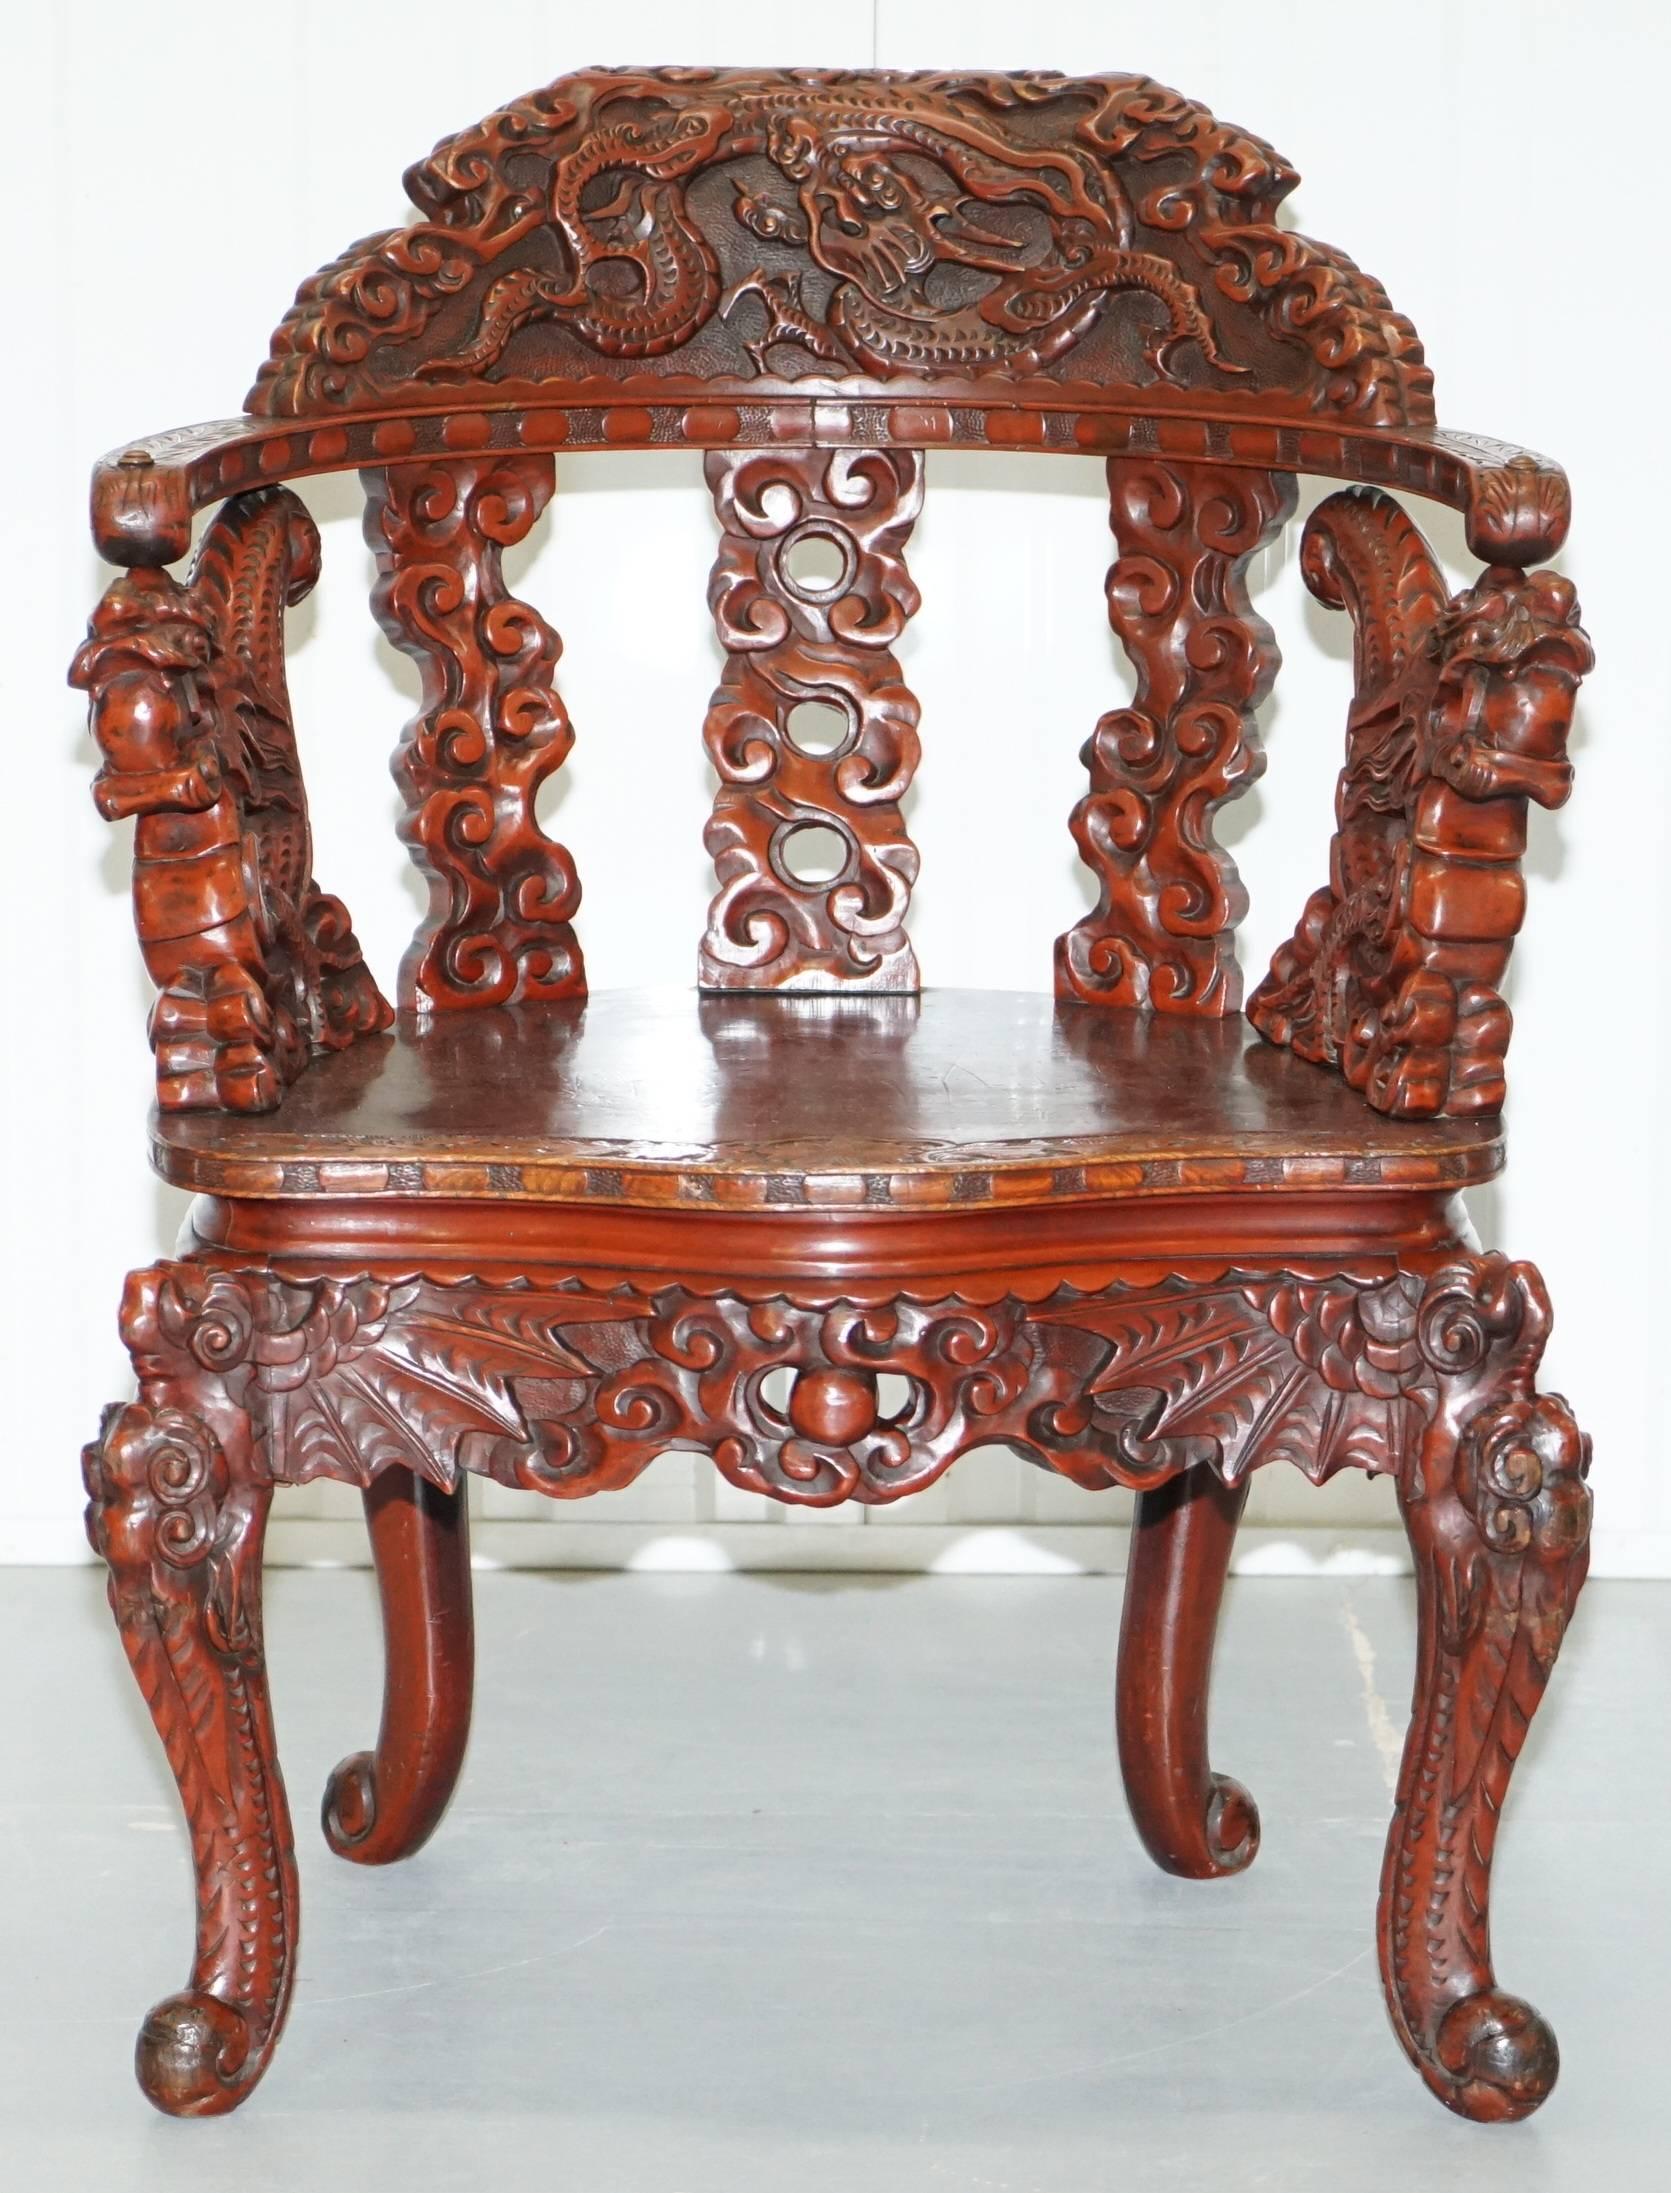 We are delighted to offer for sale this stunning rare Qing dynasty circa 1870 hand-carved solid elm lacquered dragon and Lion Foo dog throne armchair

A really rare an expertly hand-carved piece, the detail is never ending and of the highest